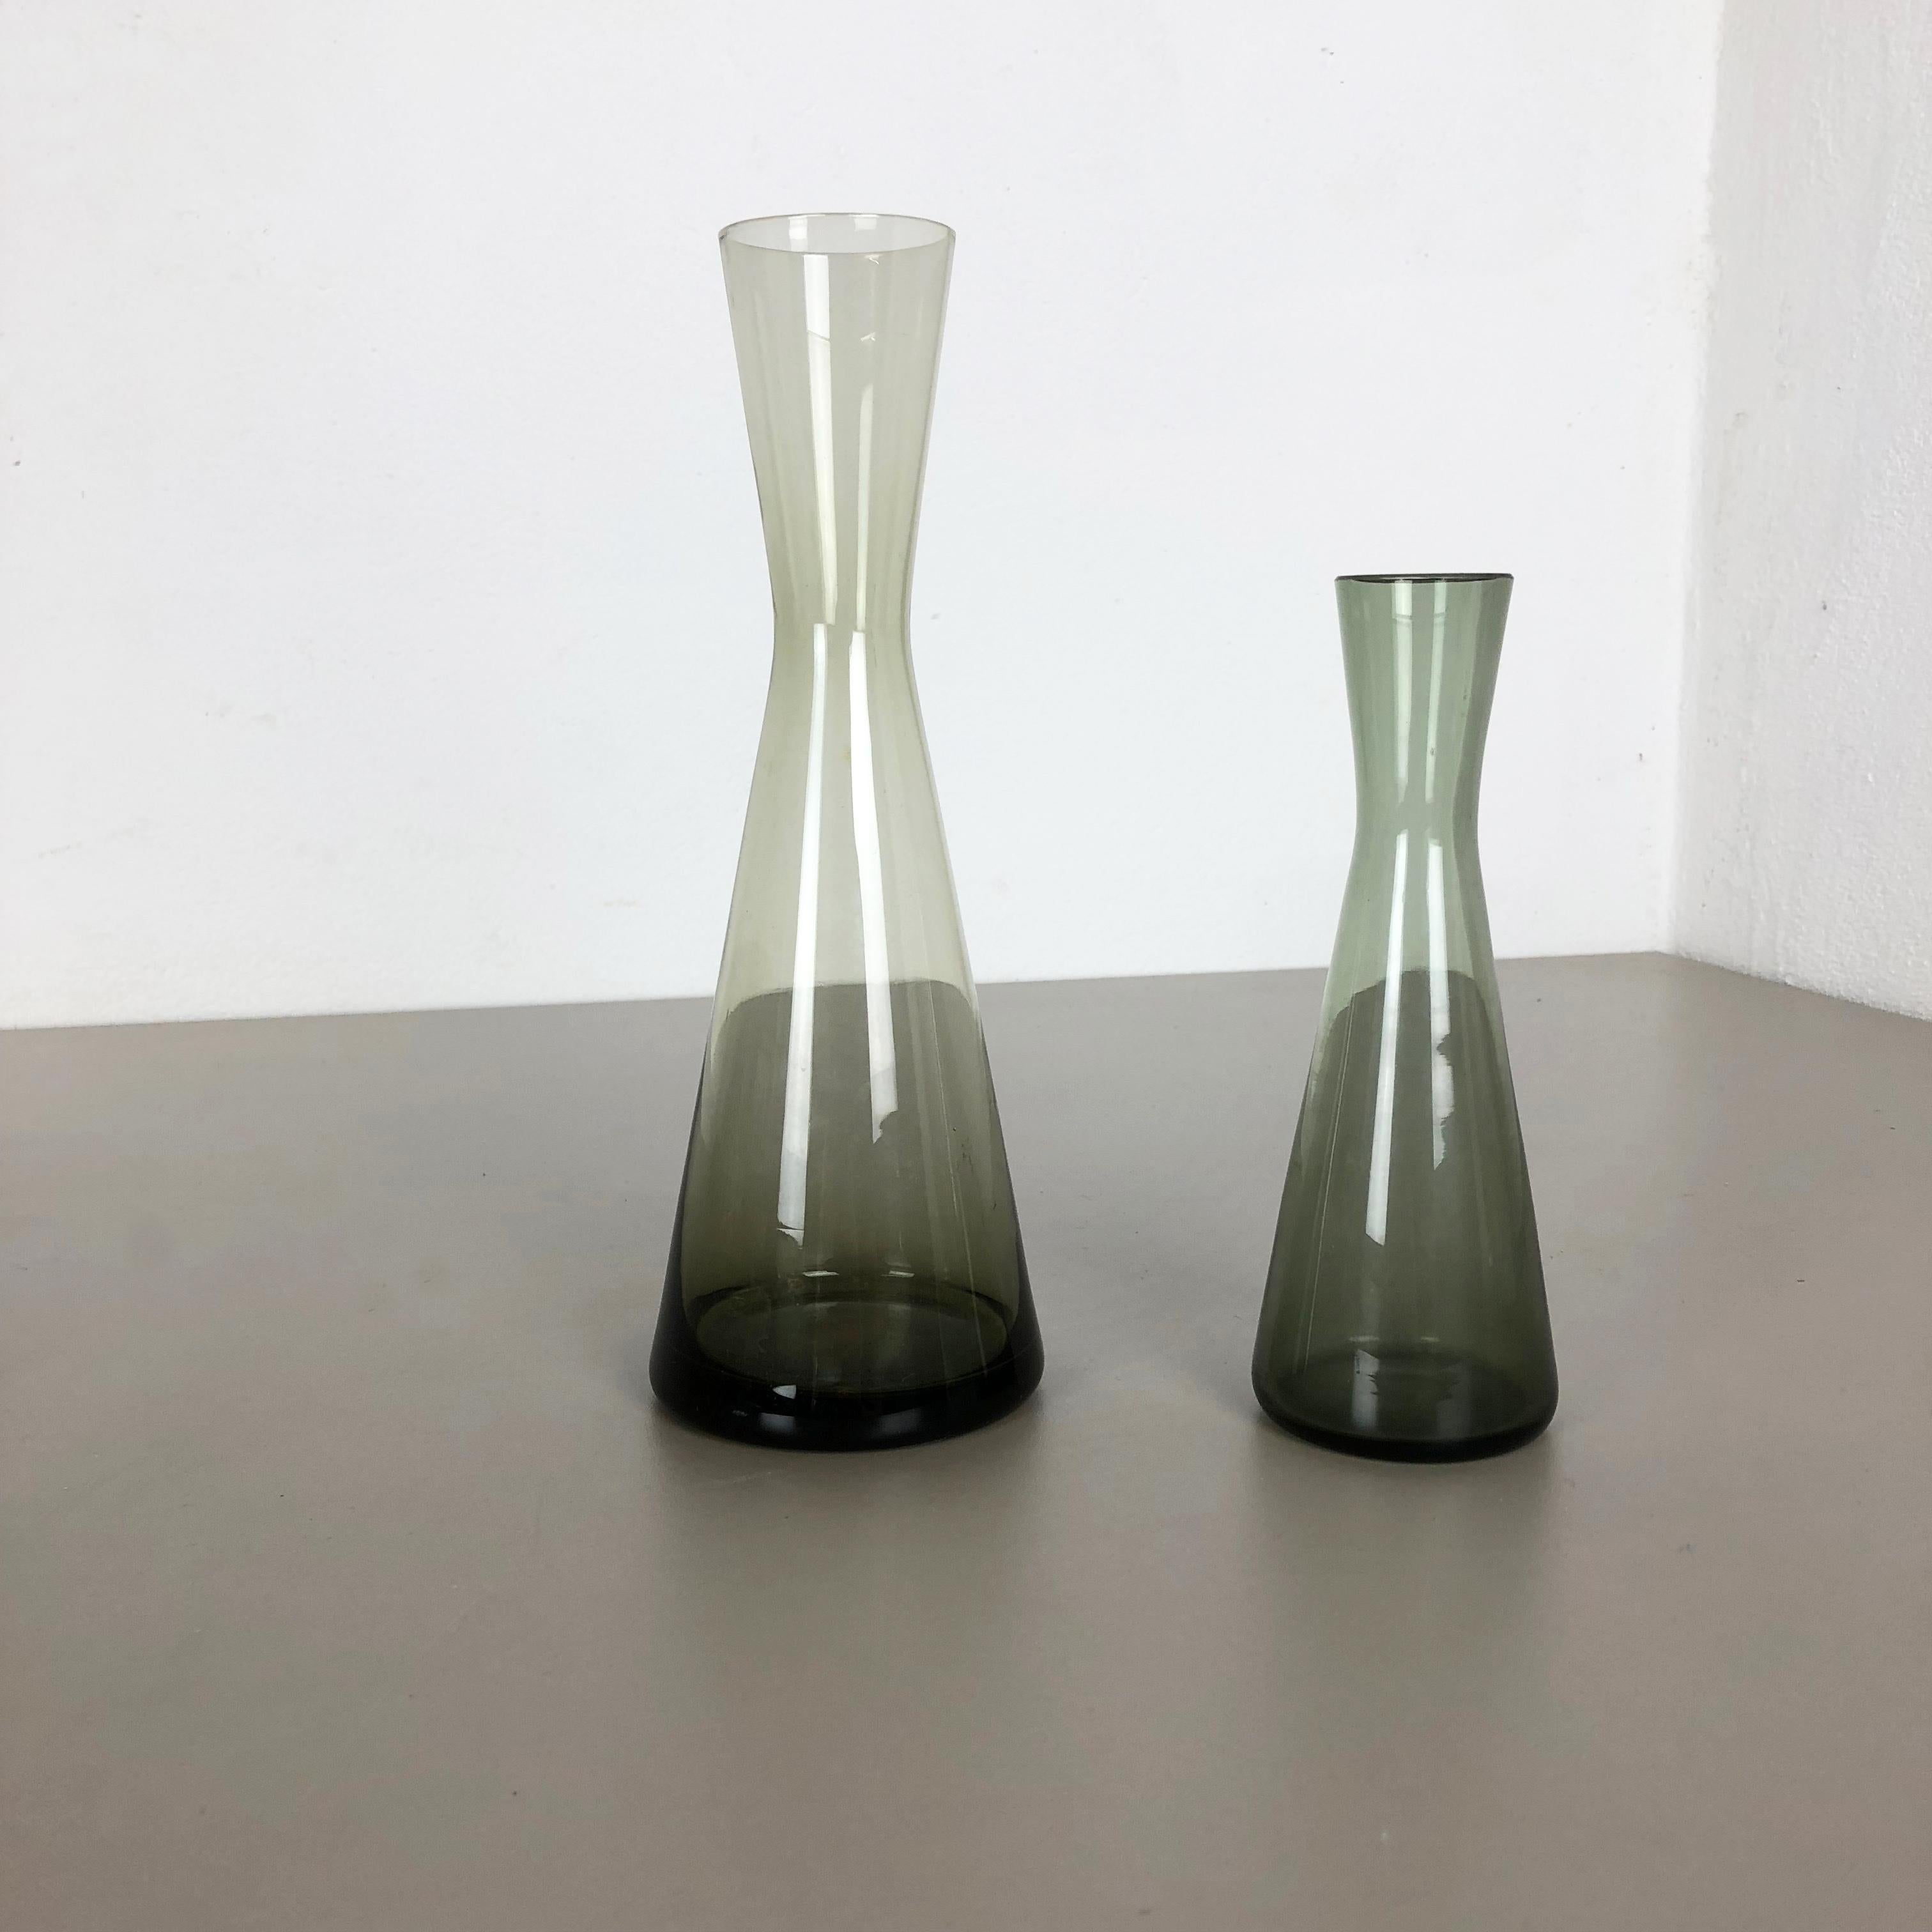 Article:

Set of 2 Turmalin vases


Producer:

WMF, Germany


Design:

Prof. Wilhelm Wagenfeld Bauhaus 



Decade:

1960s


Description:

Original vintage 1960s Set of 2 Vases of the Wagenfeld Turmalin series. These two vase